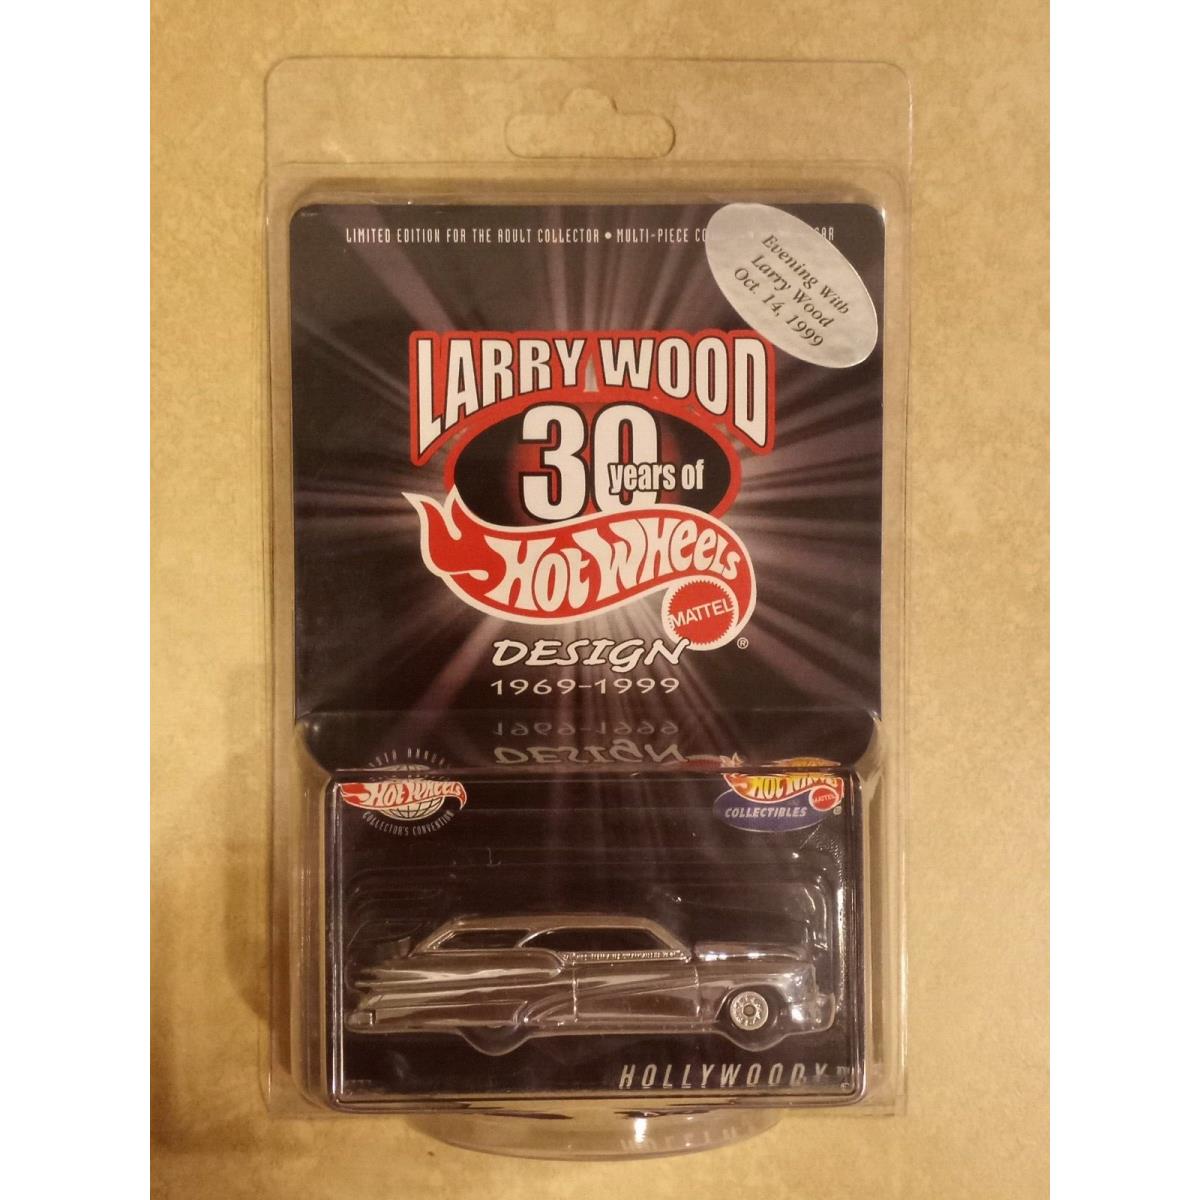 Hot Wheels Hollywoody Larry Wood 30 Years of Design 1999 Convention Dinner Car